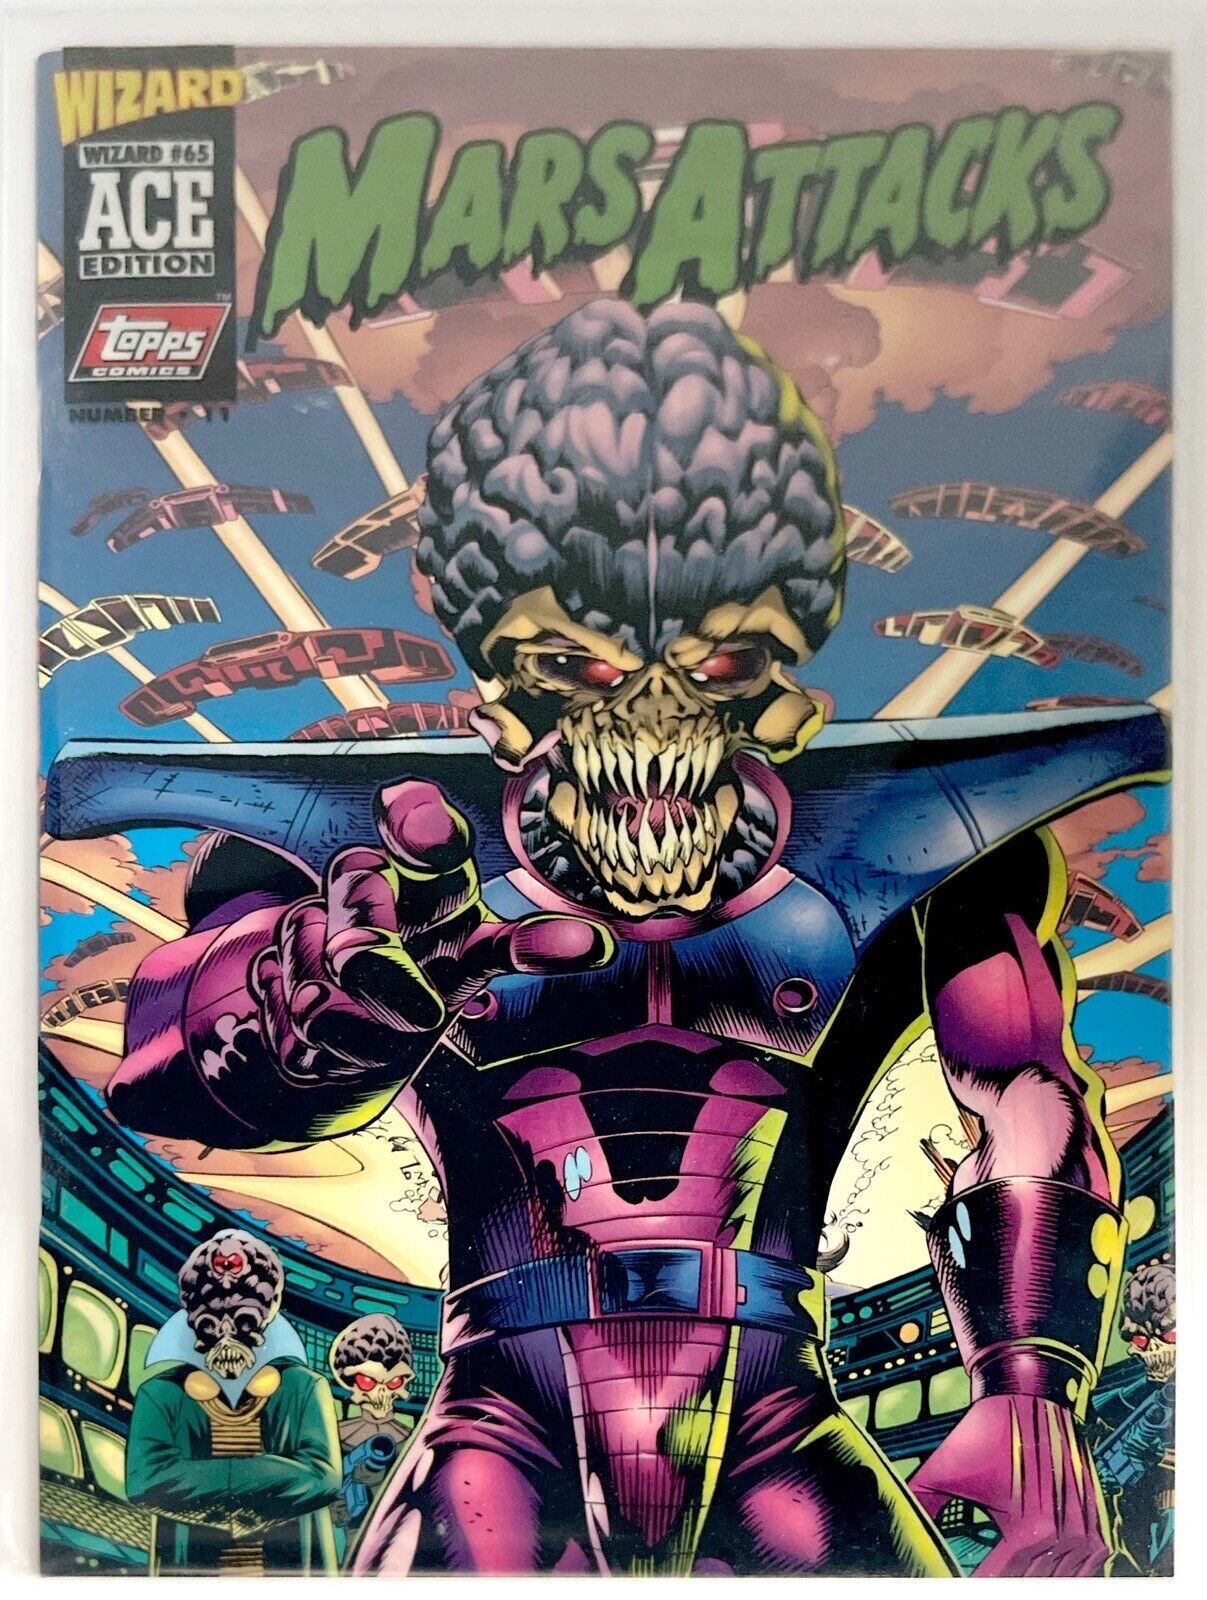 Wizard Ace Edition #11: Mars Attacks #1 #11 (Topps Comics Wizard 1996)